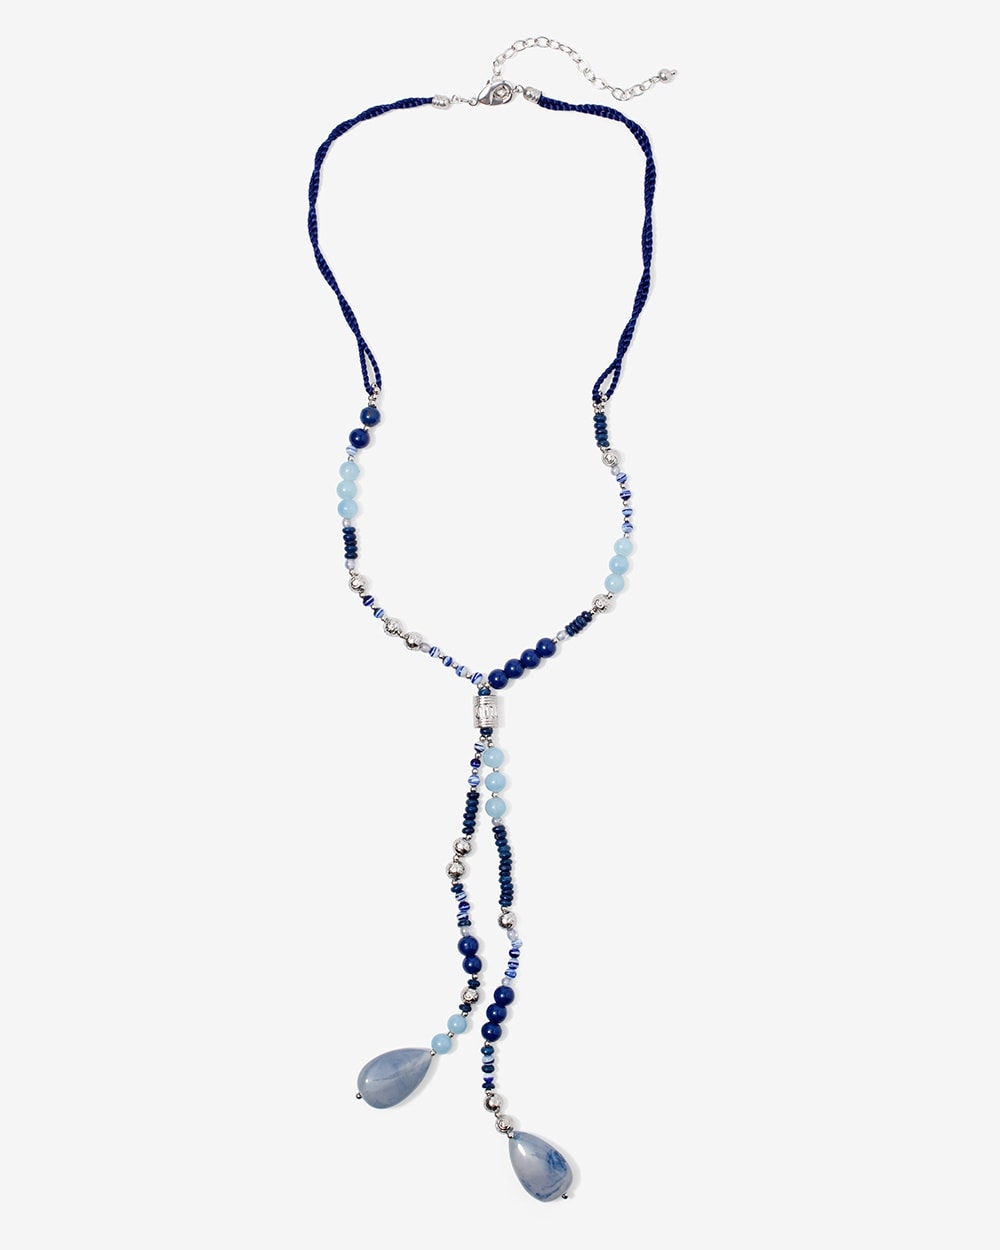 Dreamy Beaded Lariat Necklace